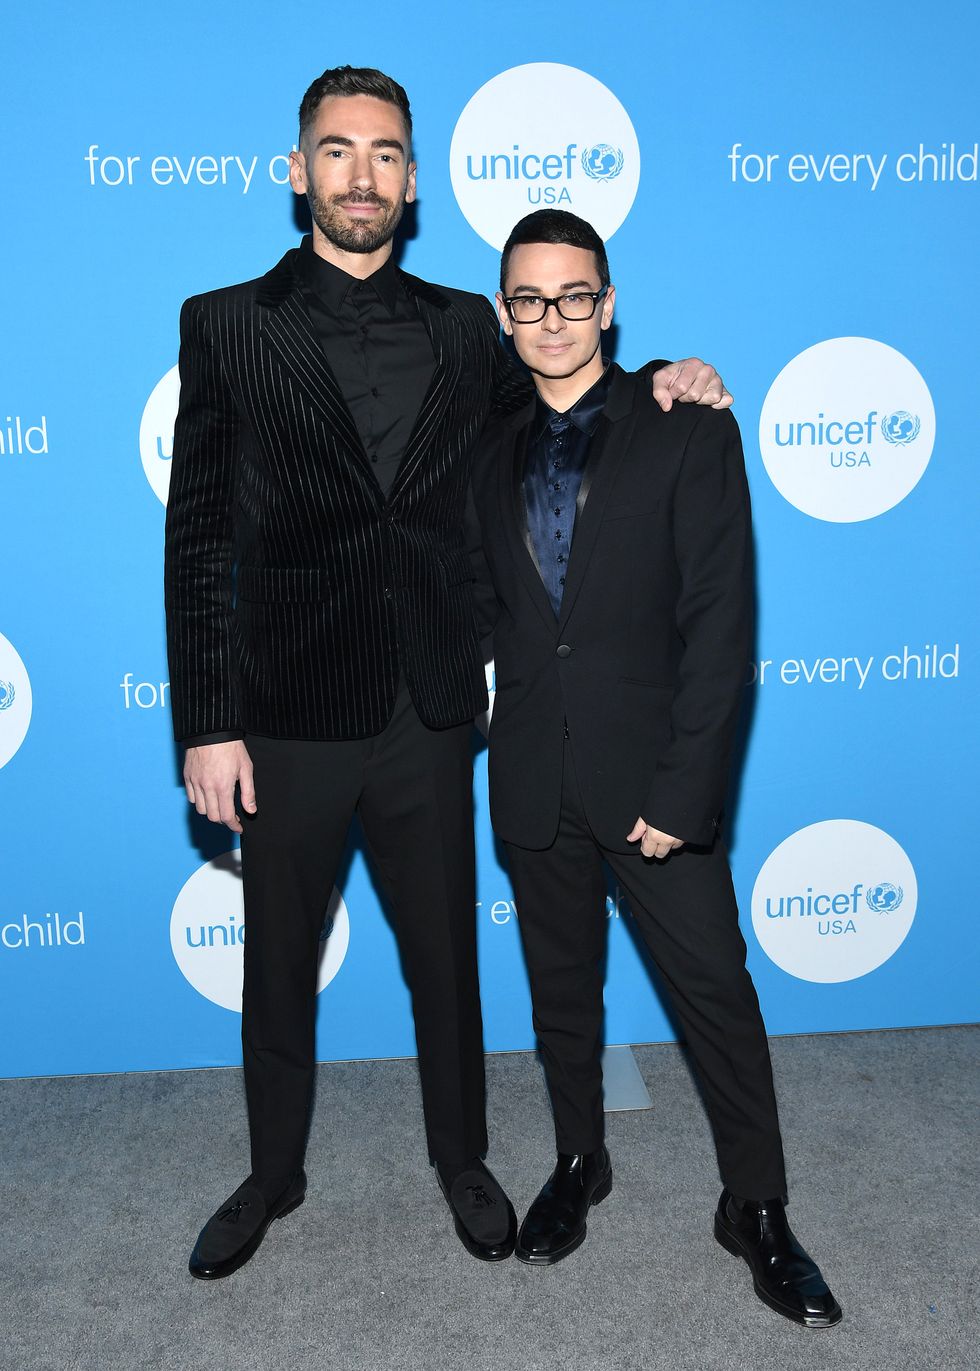 kyle smith and christian siriano at the unicef gala in new york city